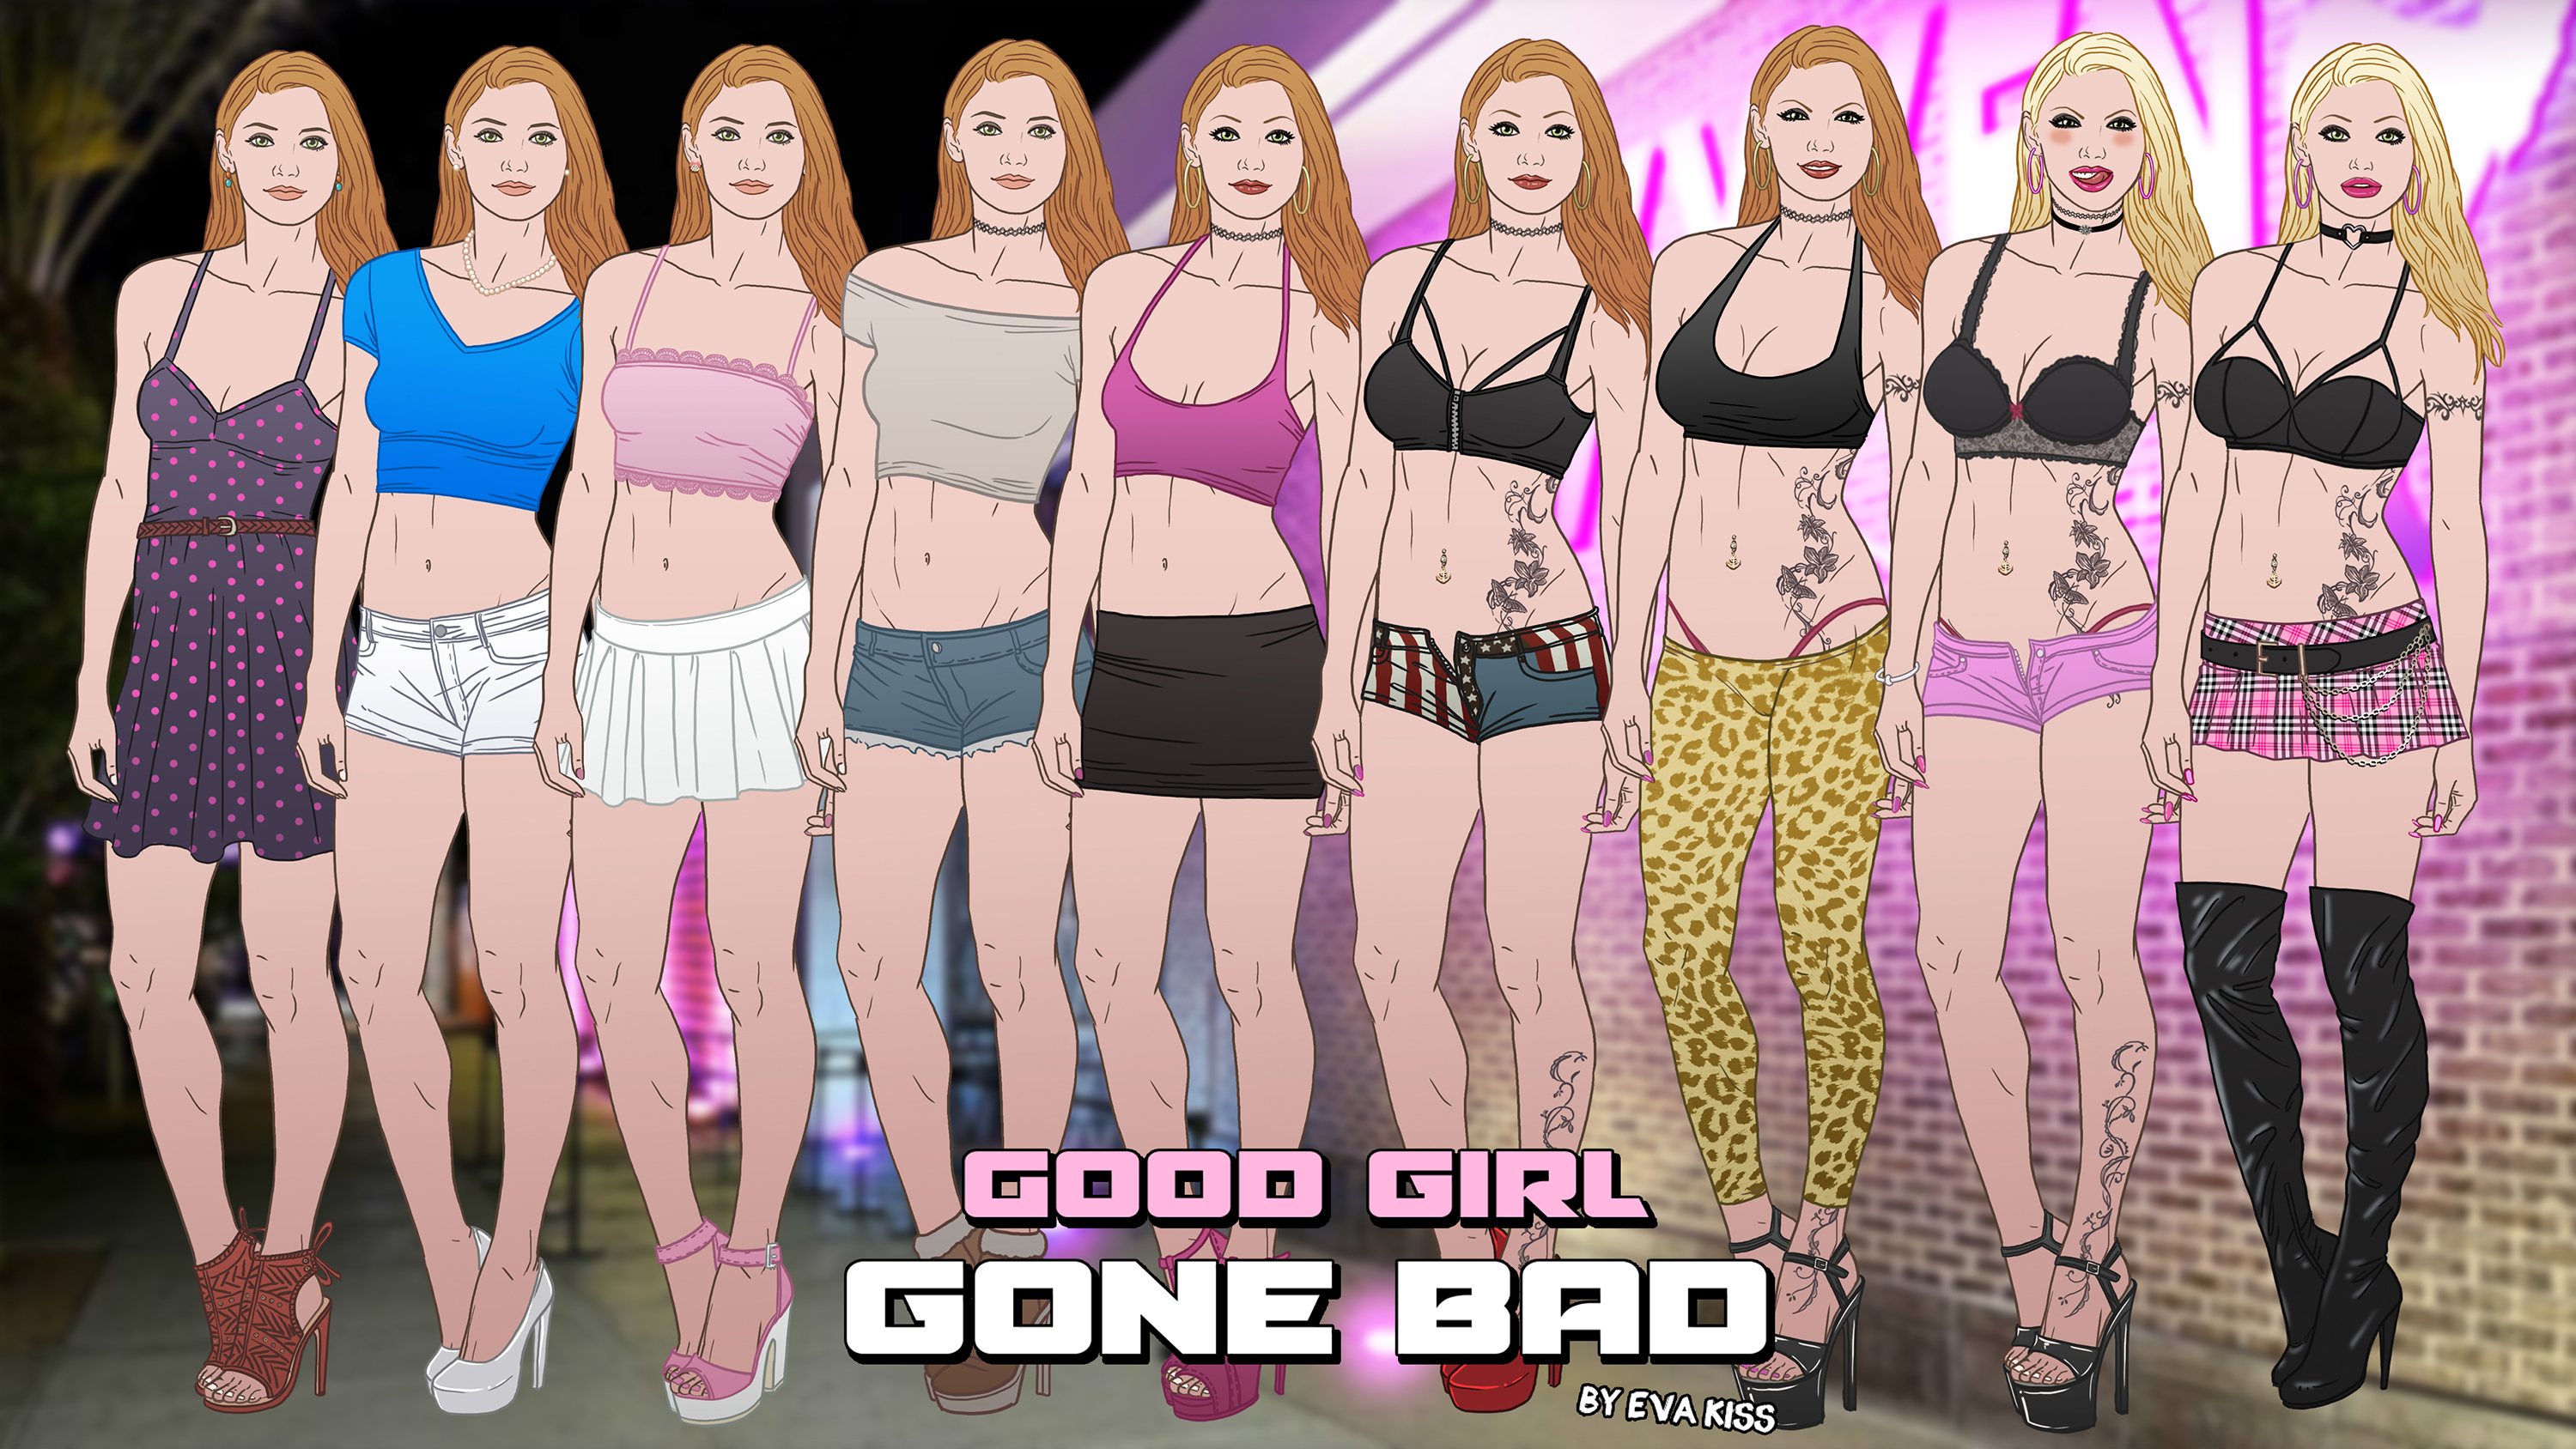 david moura recommends girls gone bad 3 pic